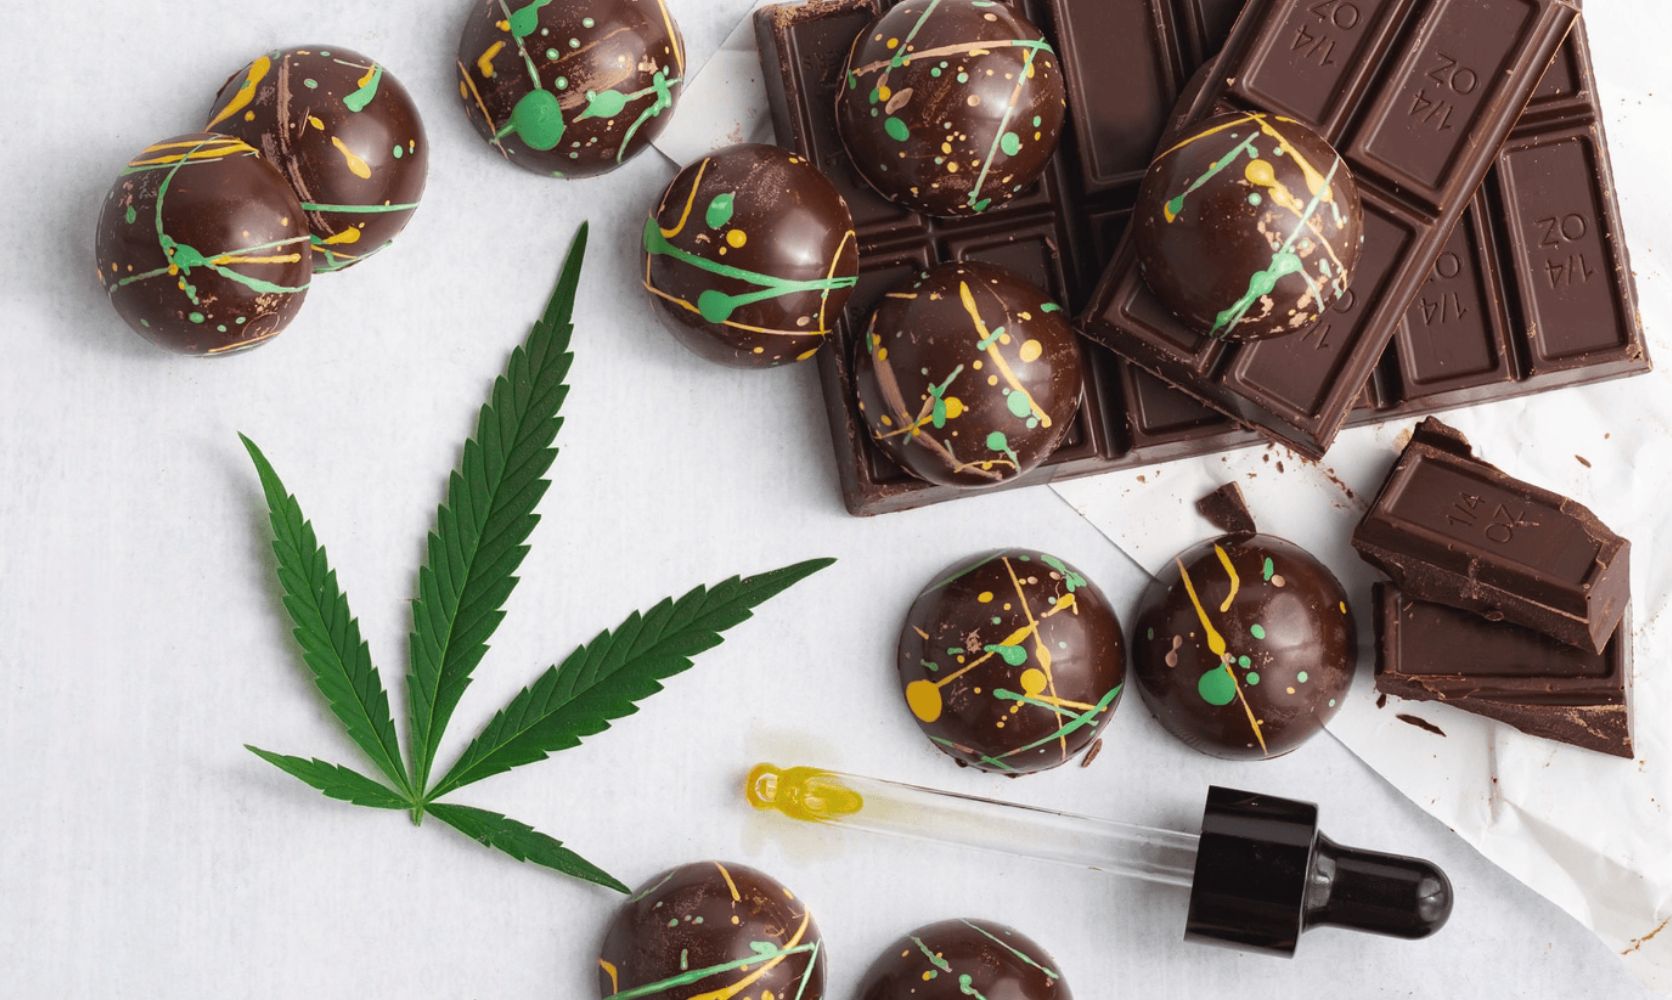 Ever thought about trying THC treats? From gummies to chocolates, explore the tasty world of edibles. Wondering where to get them online in Canada? Let's find out!